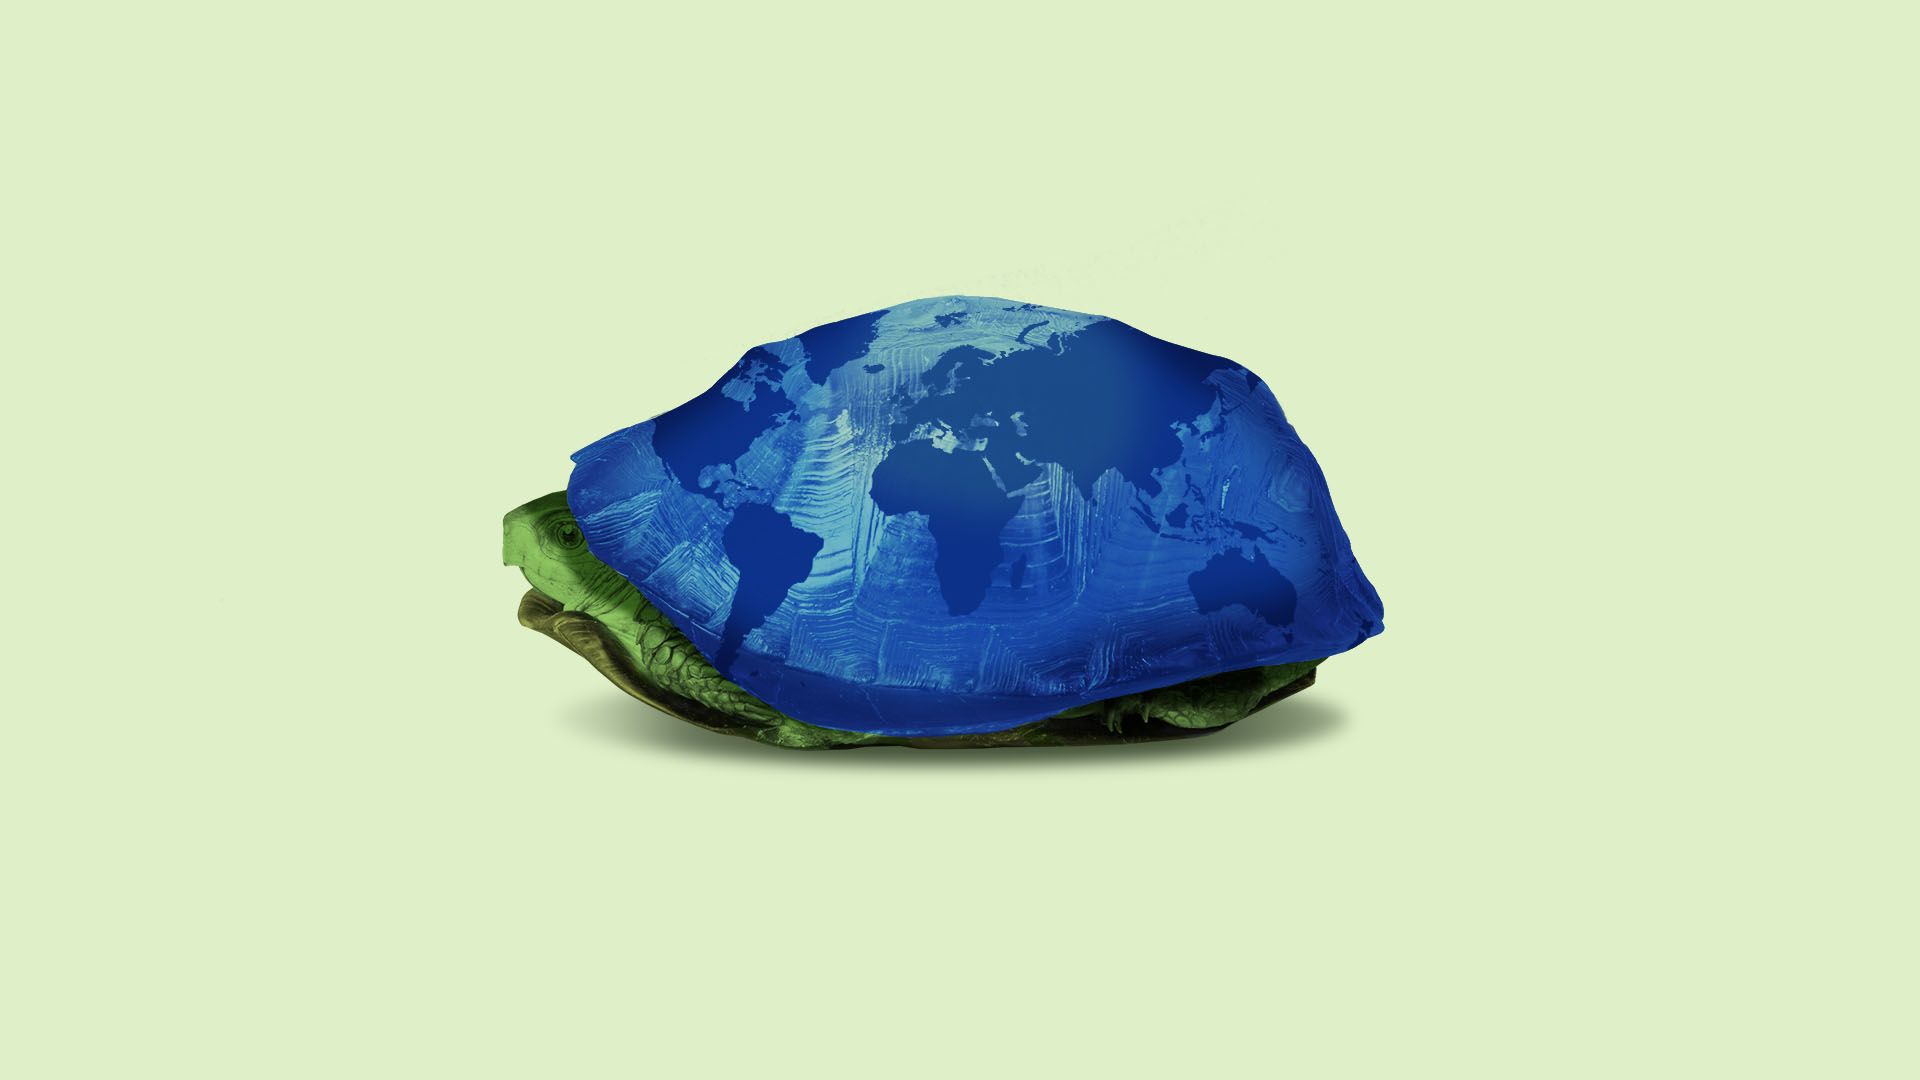 Illustration of a turtle with a globe design hiding in its shell